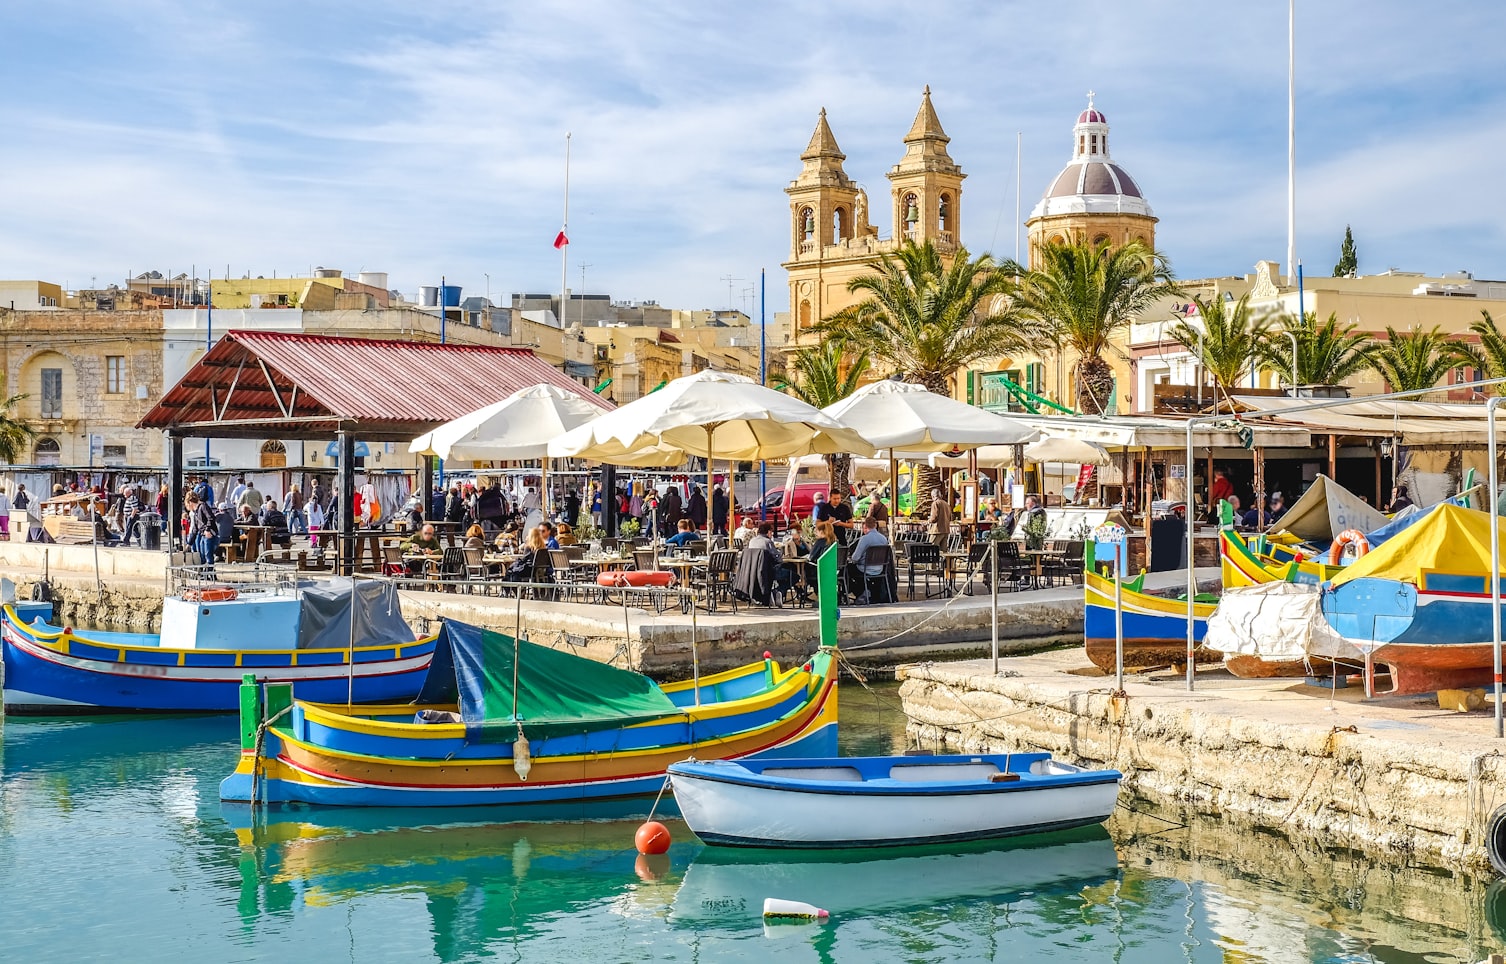 Malta Travel Guide - Attractions, What to See, Do, Costs, FAQs